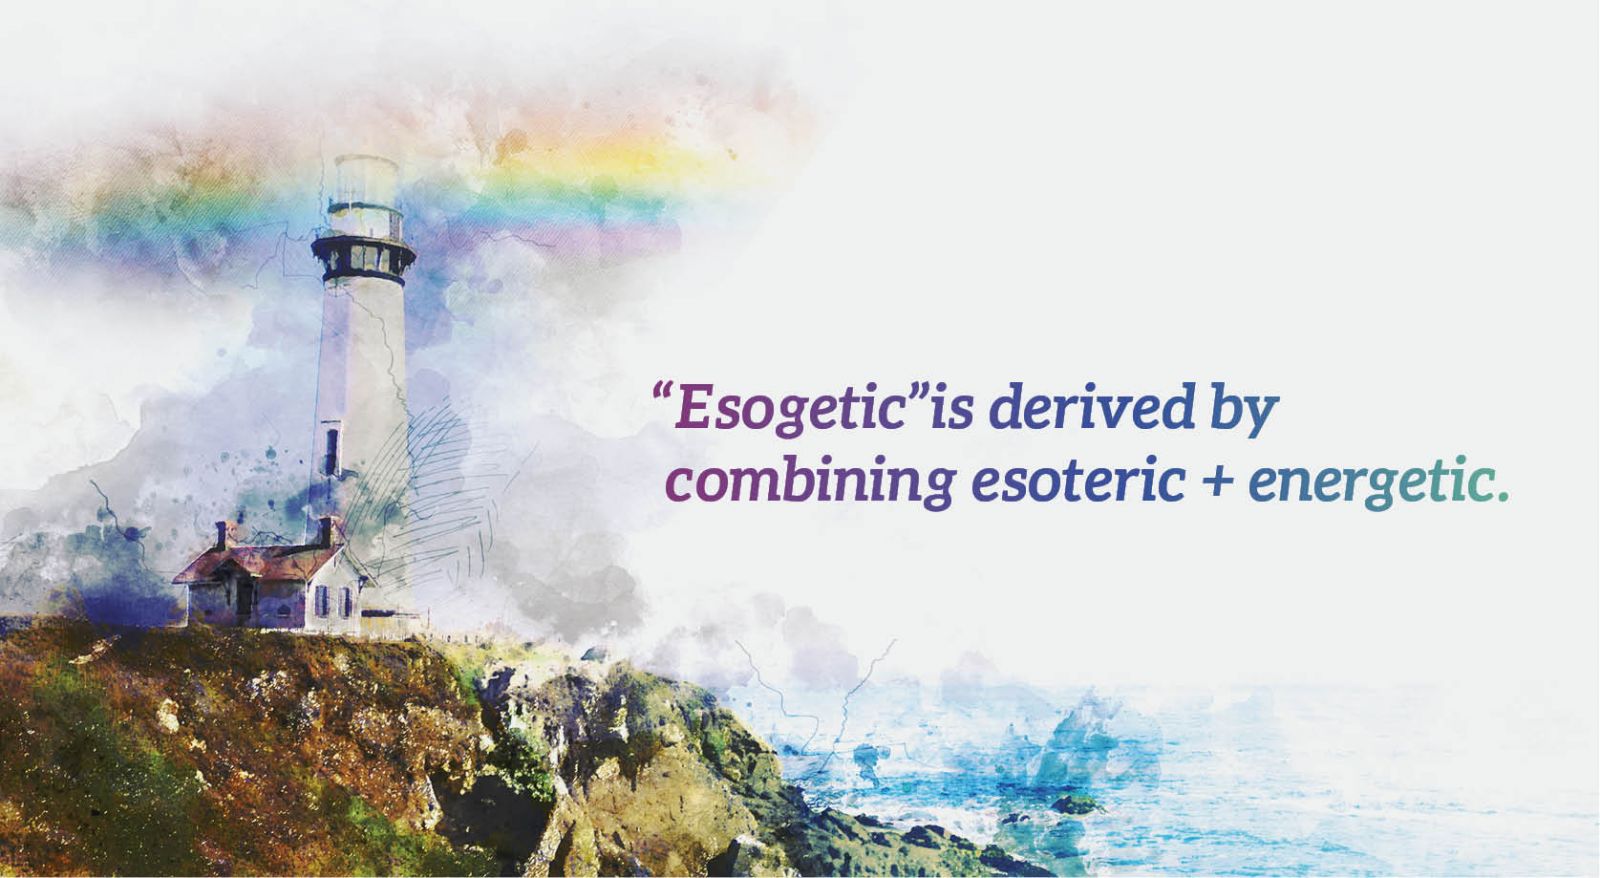 Esogetic is derived by combing esoteric + energetic